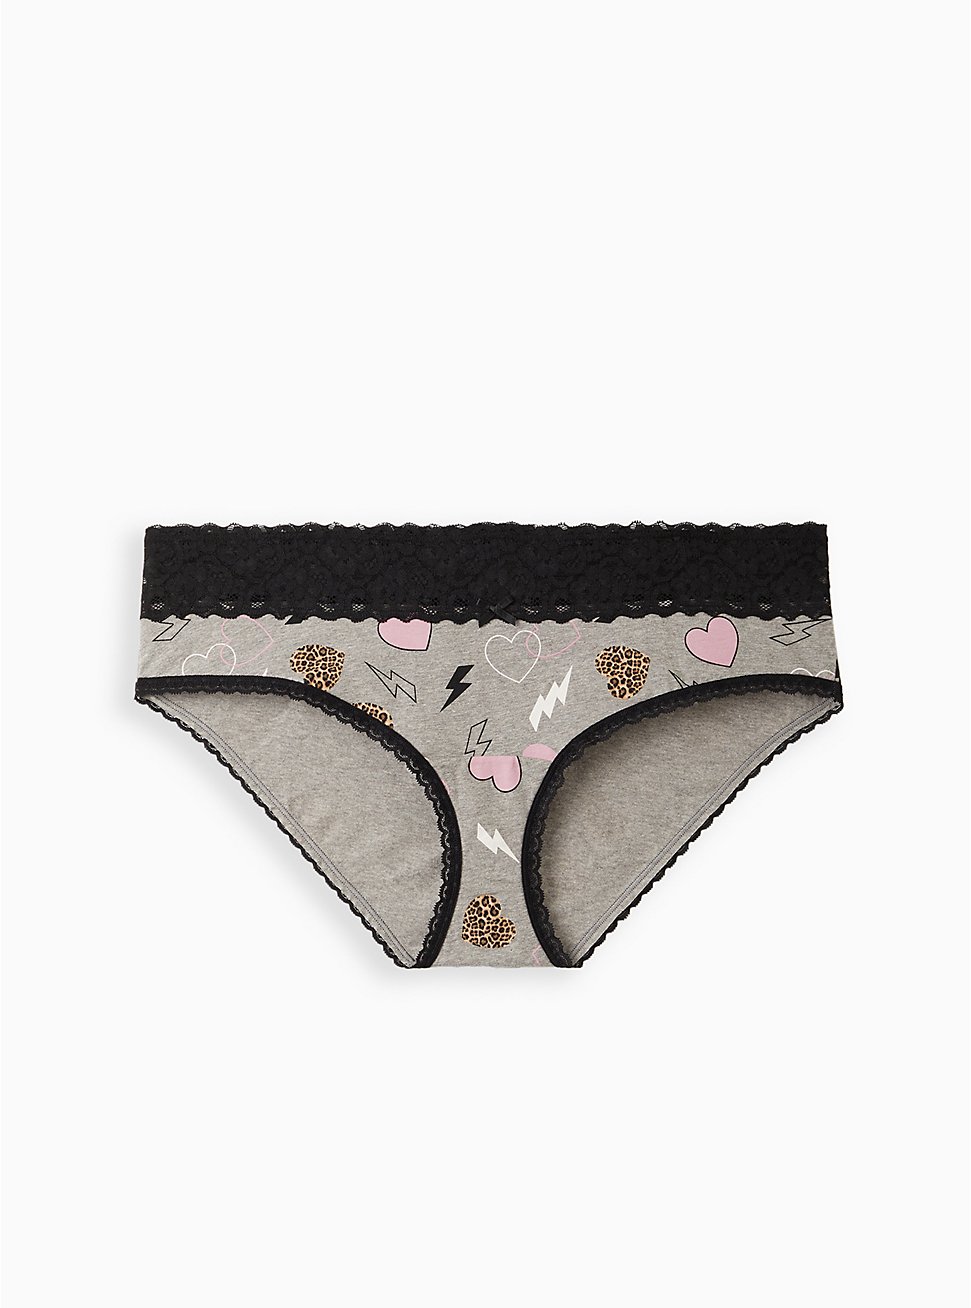 Hipster Panty - Wide Lace Cotton Heather Grey Hearts & Bolts, MULTI, hi-res